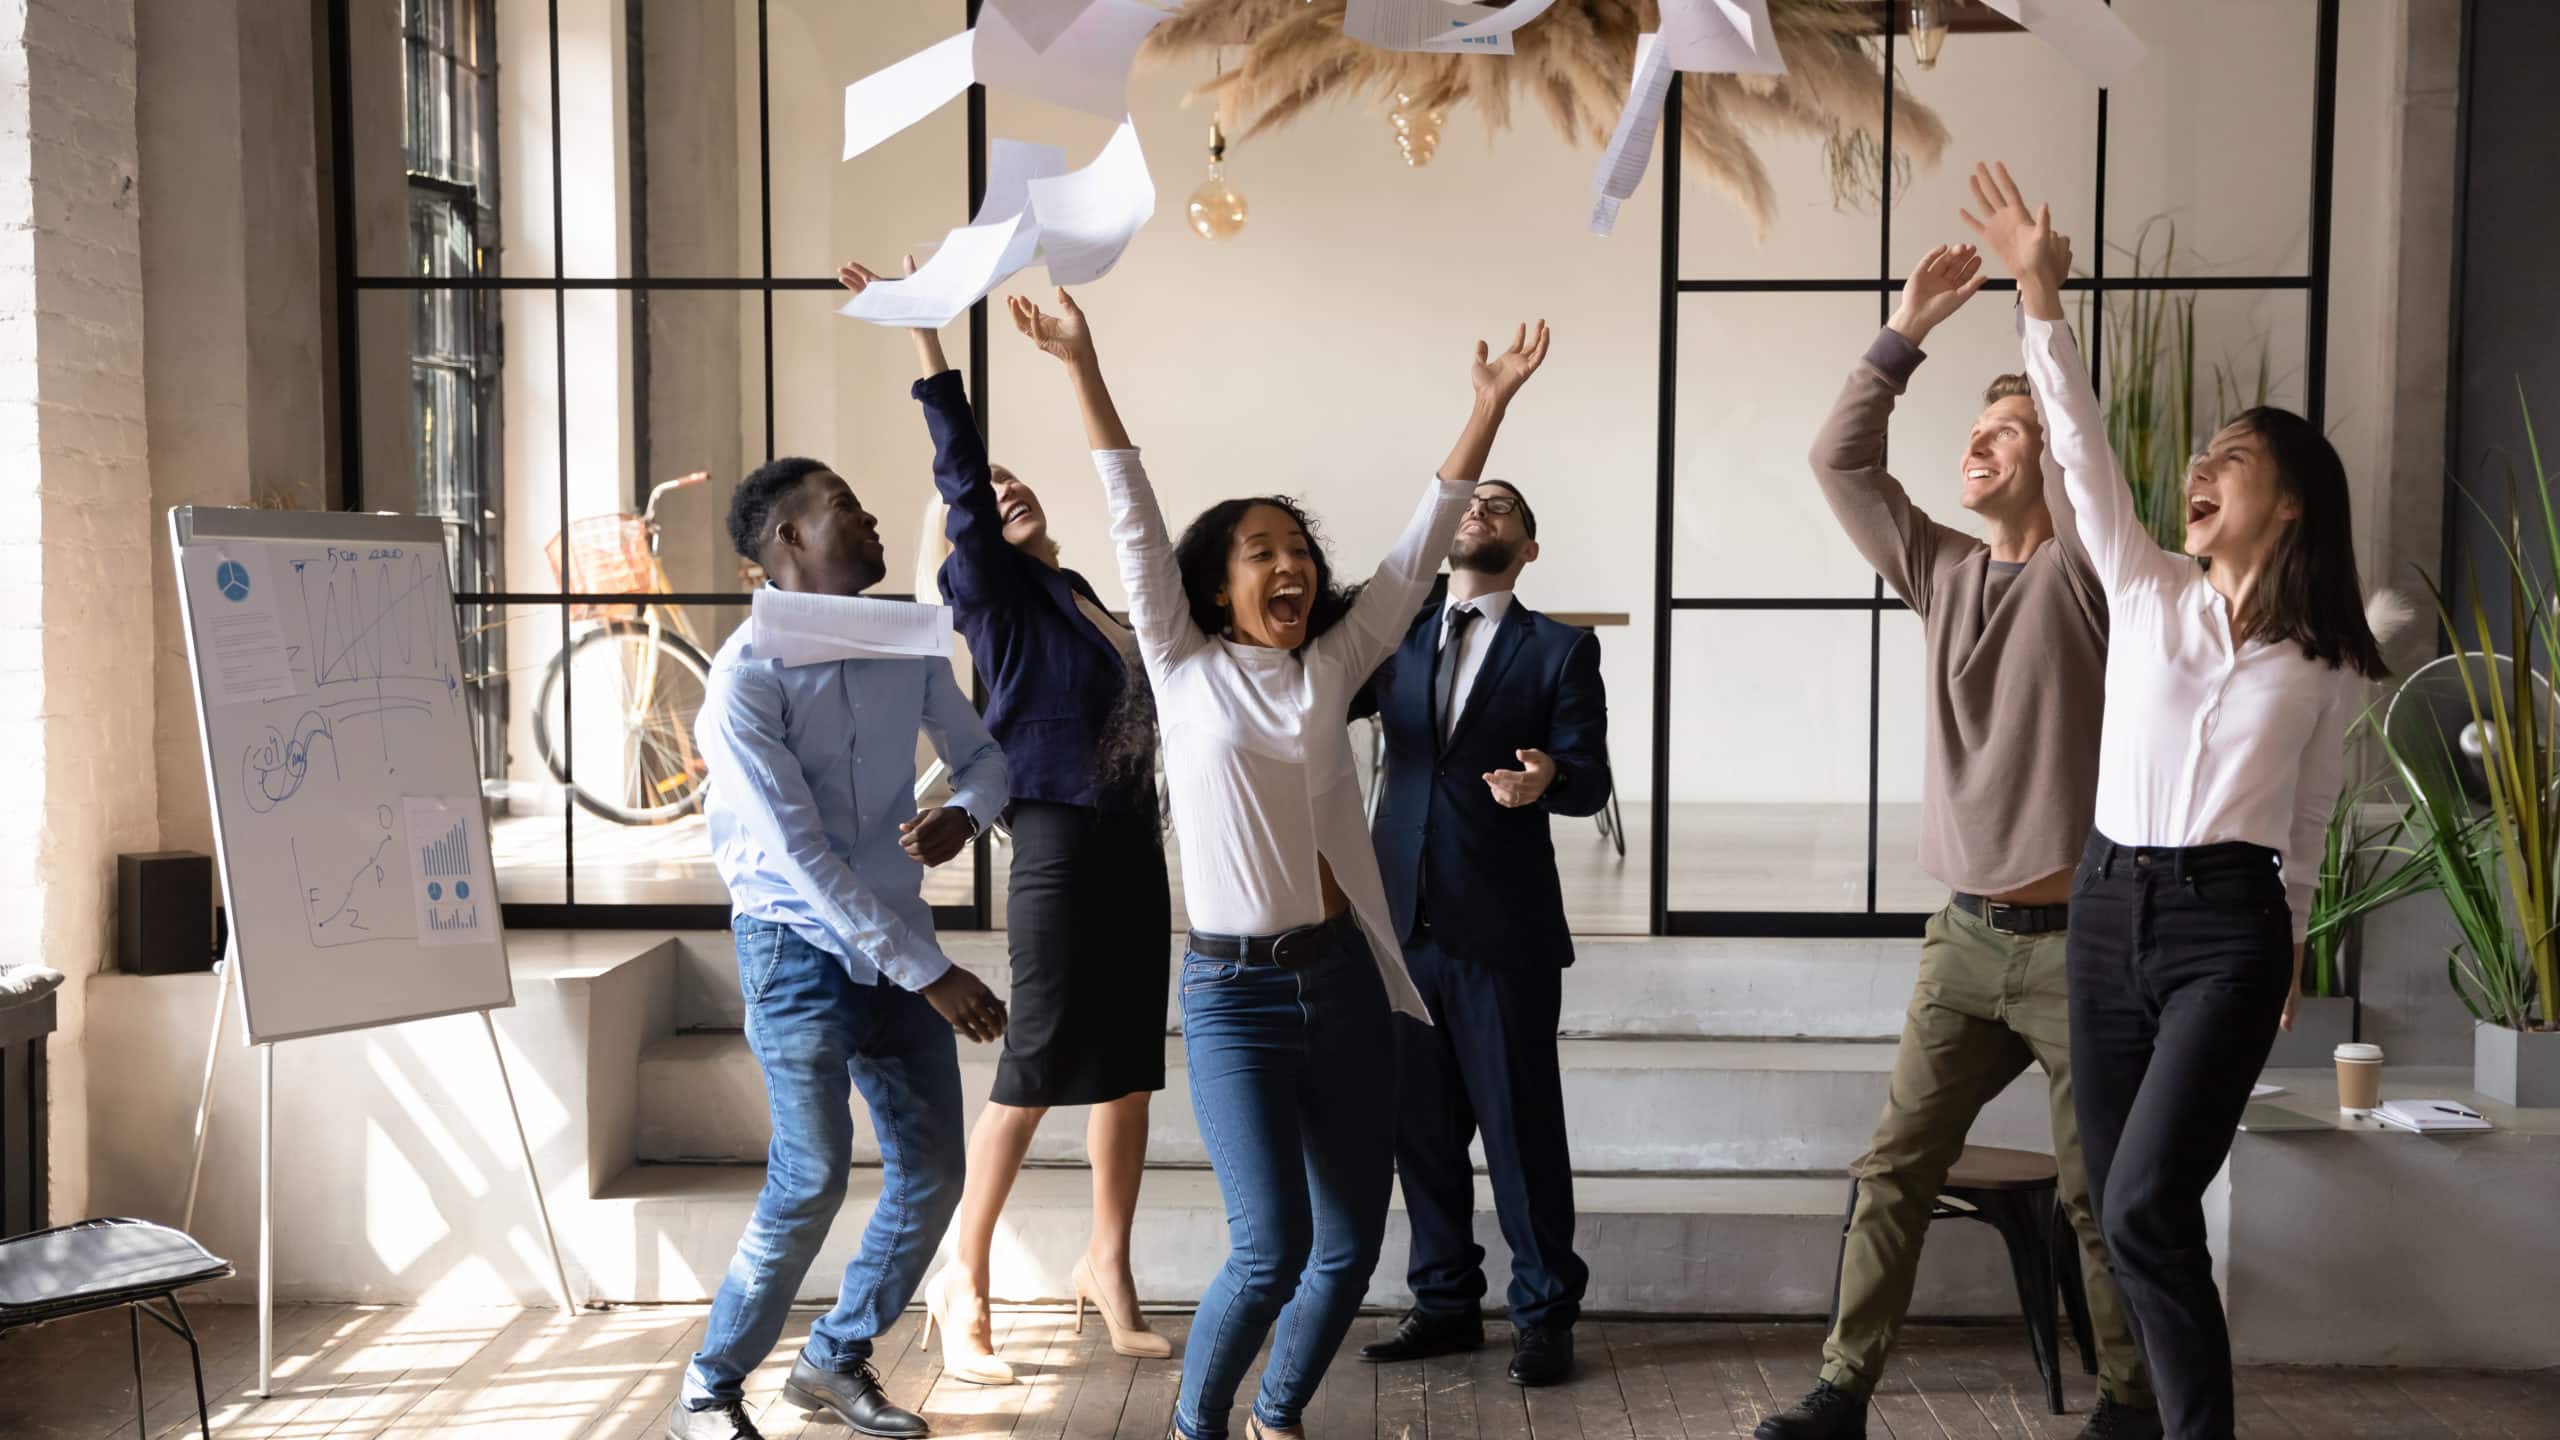 3 CREATIVE IDEAS FOR EMPLOYEE APPRECIATION WHEN GOALS ARE MET